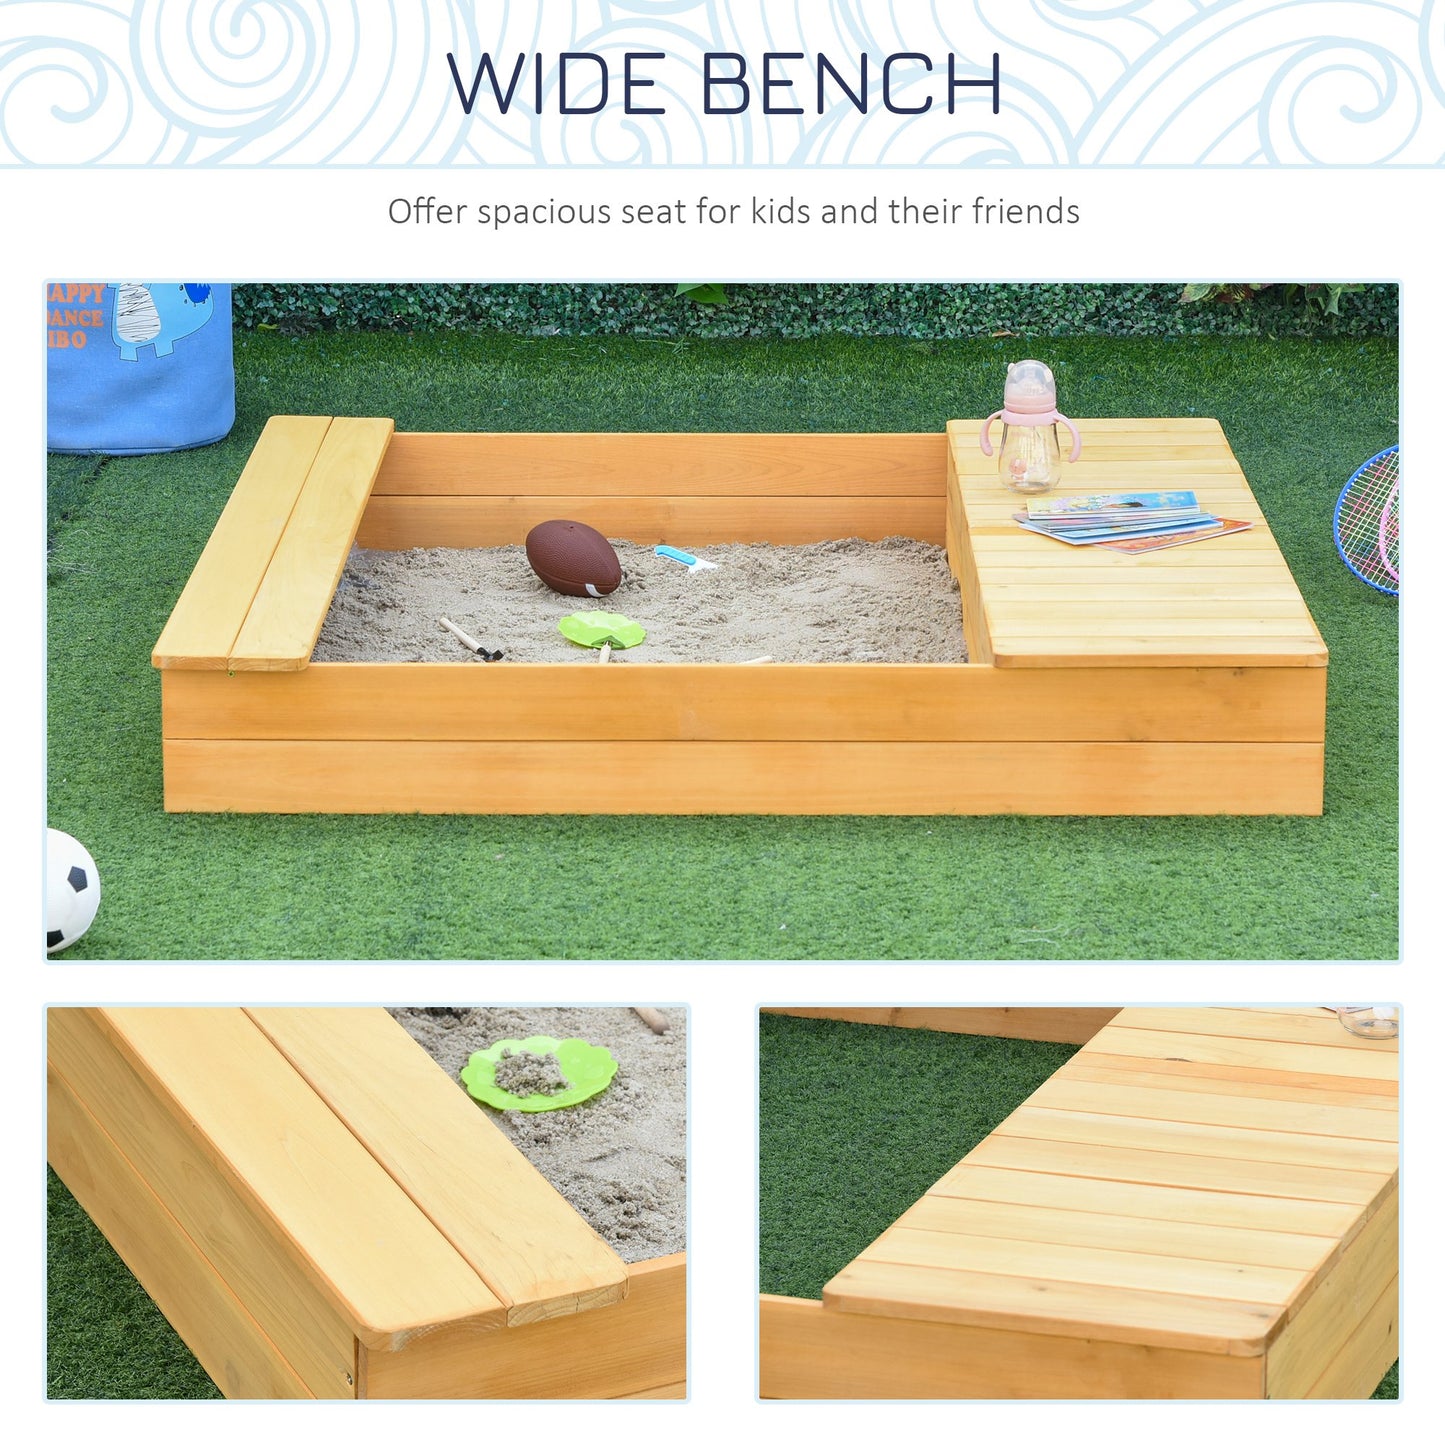 Outsunny Wooden Kids Sandpit Children Outdoor Square Sandbox with 2 Side Buckets Bench